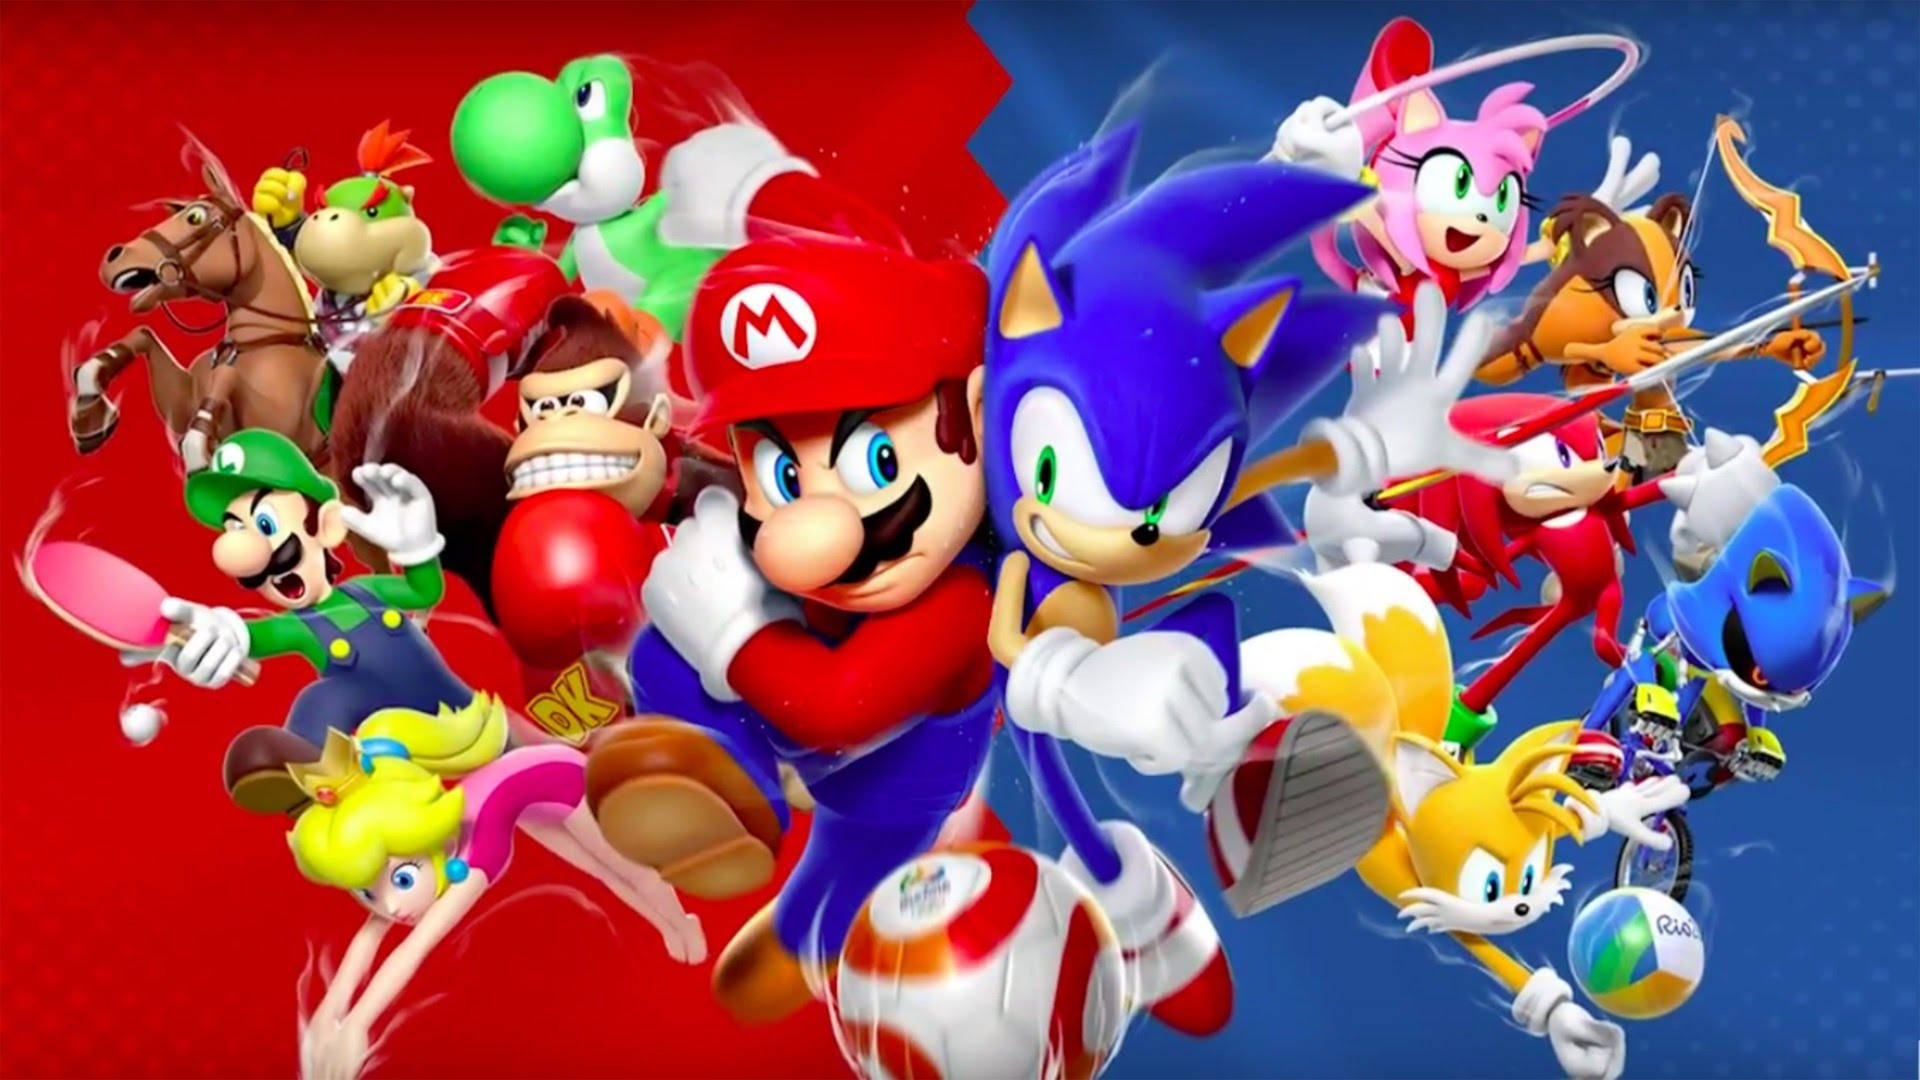 Mario and Sonic Team Up for a Fun Adventure! Wallpaper